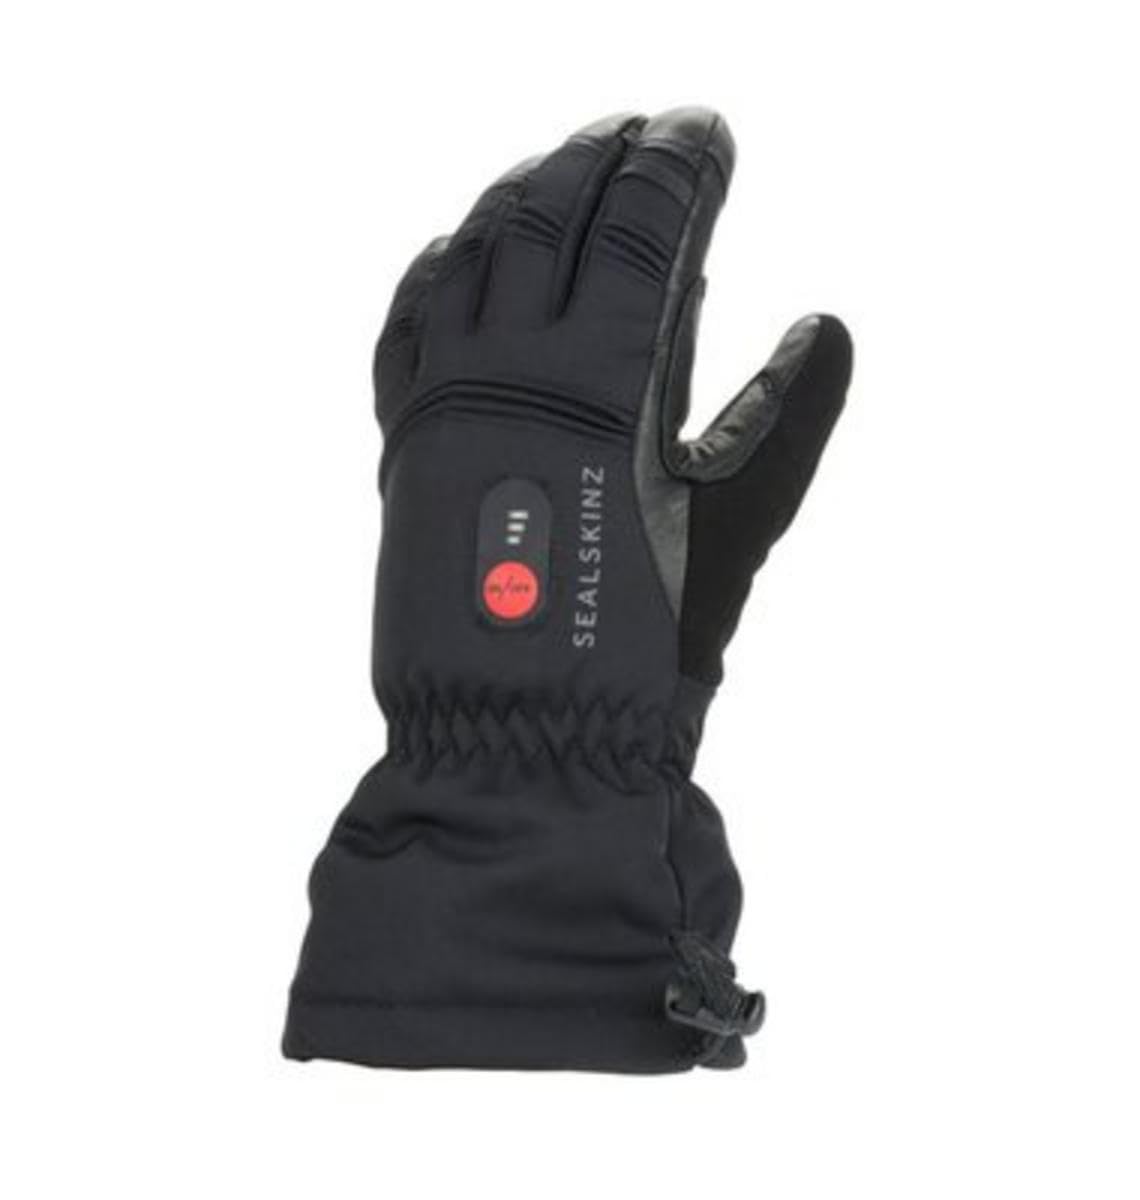 SEALSKINZ Filby Heated Gauntlet Review